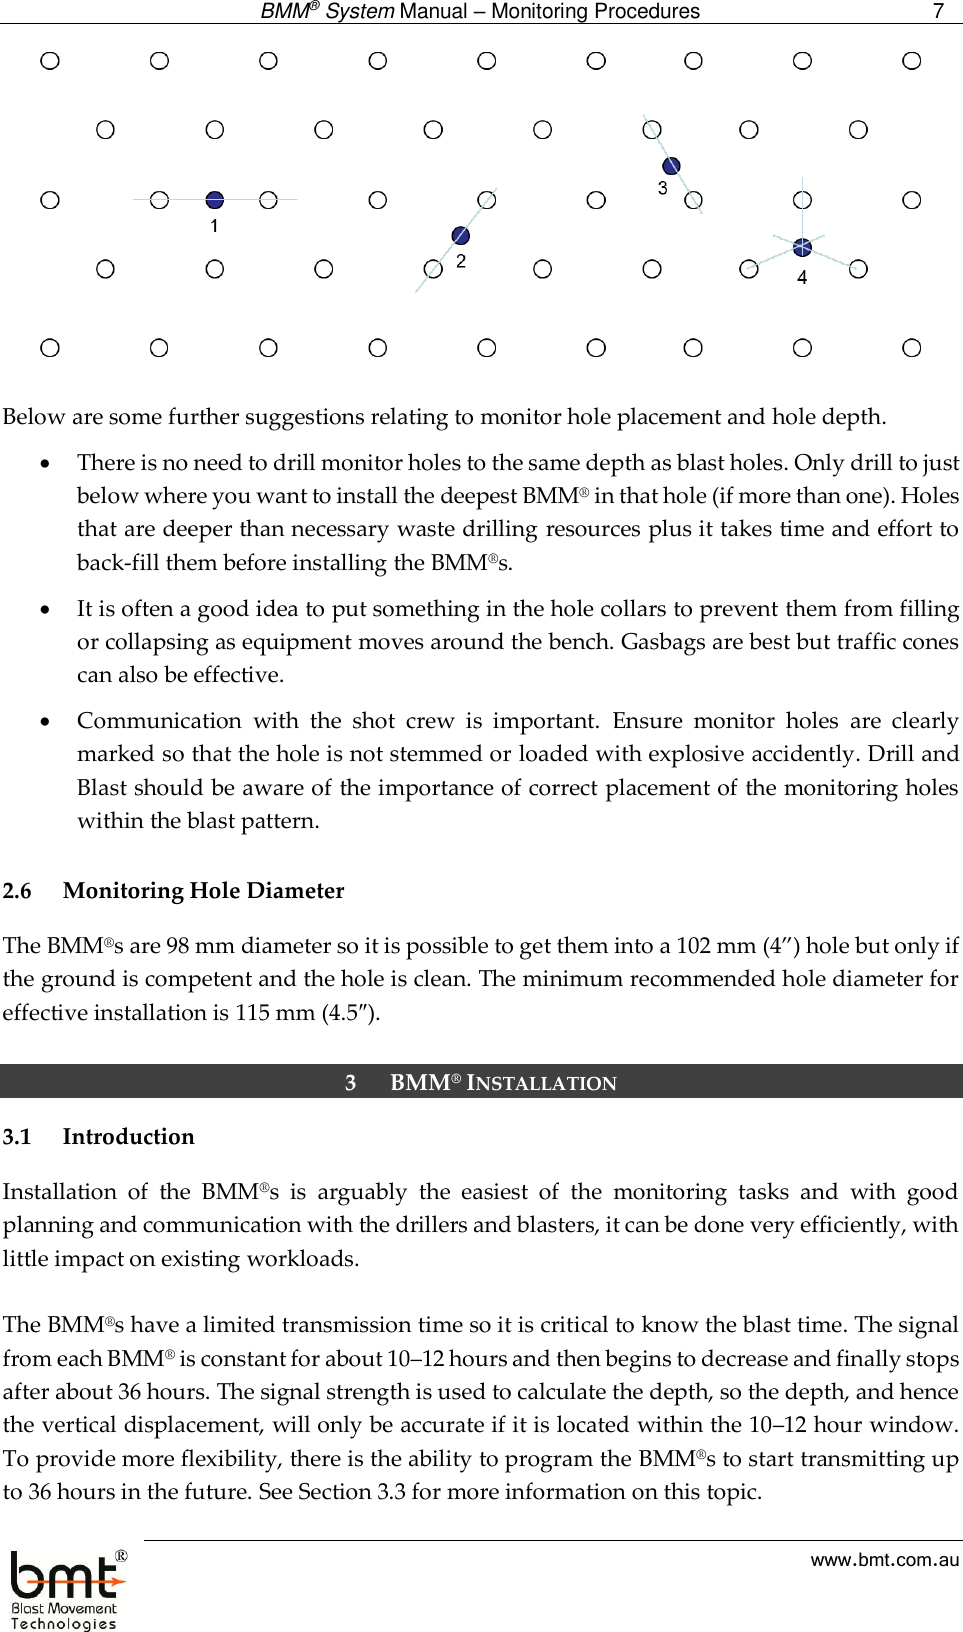  BMM® System Manual – Monitoring Procedures 7  www.bmt.com.au   Below are some further suggestions relating to monitor hole placement and hole depth.  There is no need to drill monitor holes to the same depth as blast holes. Only drill to just below where you want to install the deepest BMM® in that hole (if more than one). Holes that are deeper than necessary waste drilling resources plus it takes time and effort to back-fill them before installing the BMM®s.  It is often a good idea to put something in the hole collars to prevent them from filling or collapsing as equipment moves around the bench. Gasbags are best but traffic cones can also be effective.   Communication  with  the  shot  crew  is  important.  Ensure  monitor  holes  are  clearly marked so that the hole is not stemmed or loaded with explosive accidently. Drill and Blast should be aware of the importance of correct placement of the monitoring holes within the blast pattern.  2.6 Monitoring Hole Diameter The BMM®s are 98 mm diameter so it is possible to get them into a 102 mm (4”) hole but only if the ground is competent and the hole is clean. The minimum recommended hole diameter for effective installation is 115 mm (4.5″).   3 BMM® INSTALLATION 3.1 Introduction Installation  of  the  BMM®s  is  arguably  the  easiest  of  the  monitoring  tasks  and  with  good planning and communication with the drillers and blasters, it can be done very efficiently, with little impact on existing workloads.   The BMM®s have a limited transmission time so it is critical to know the blast time. The signal from each BMM® is constant for about 10–12 hours and then begins to decrease and finally stops after about 36 hours. The signal strength is used to calculate the depth, so the depth, and hence the vertical displacement, will only be accurate if it is located within the 10–12 hour window. To provide more flexibility, there is the ability to program the BMM®s to start transmitting up to 36 hours in the future. See Section 3.3 for more information on this topic.  